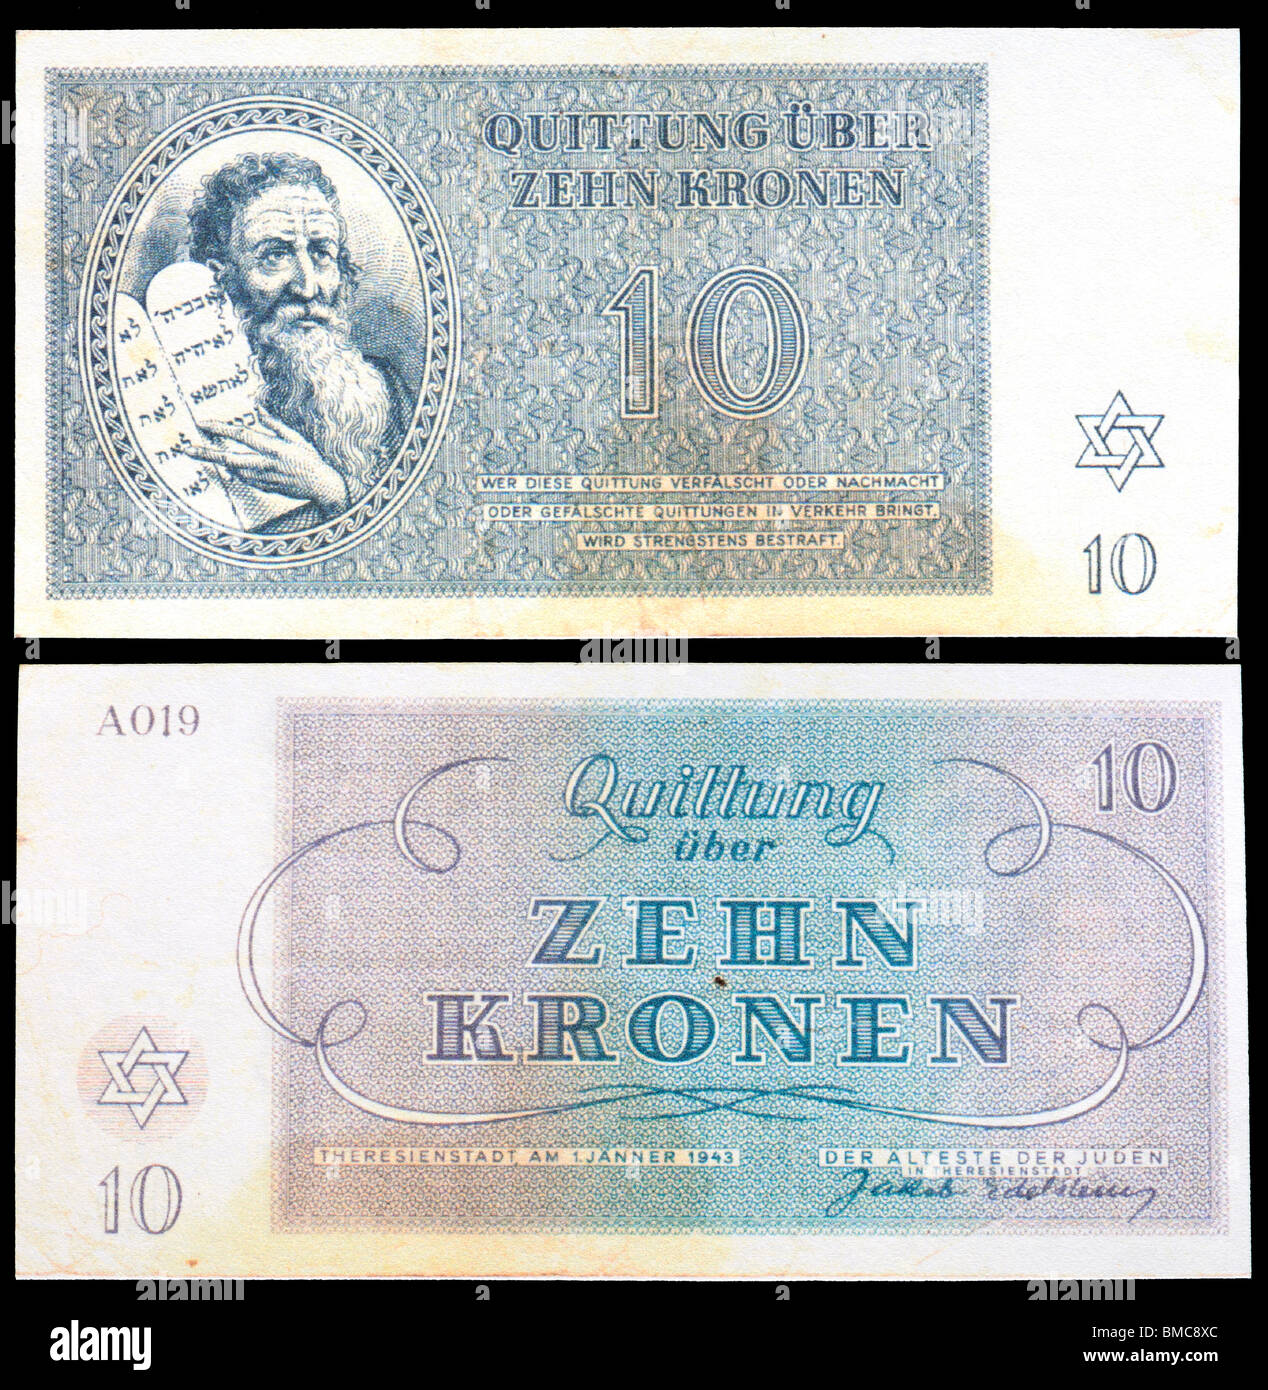 Money from the Teresienstadt Ghetto (1943) issued by Nazis. Moses holding the Ten Commandments. Zehn Kronen / Ten Crowns Stock Photo